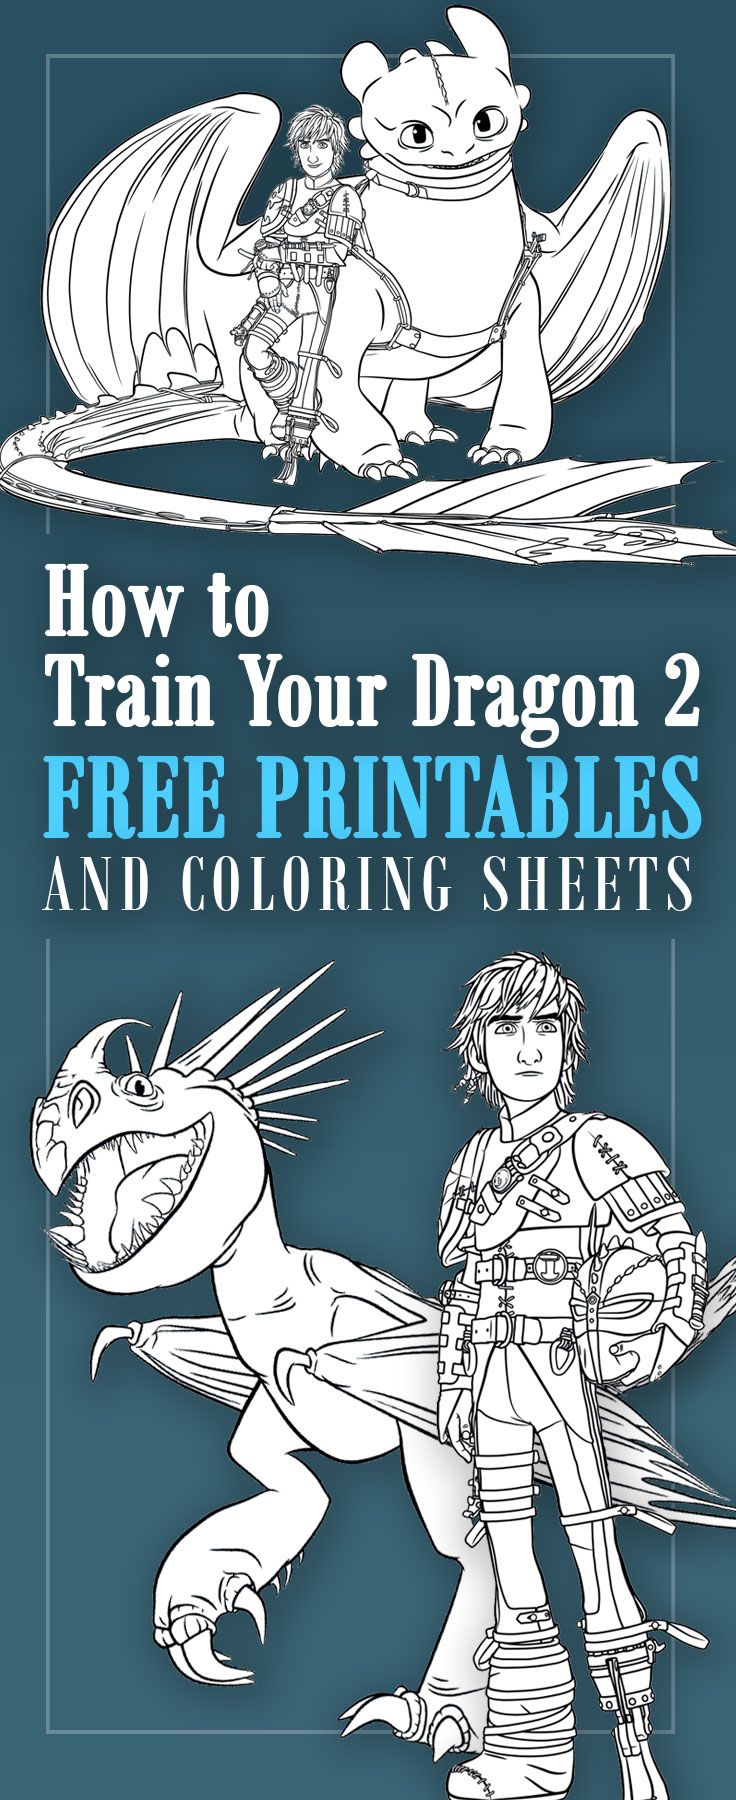 How-to-Train-Your-Dragon-coloring-pages-and-activity-sheets How to Train Your Dragon coloring pages and activity sheets